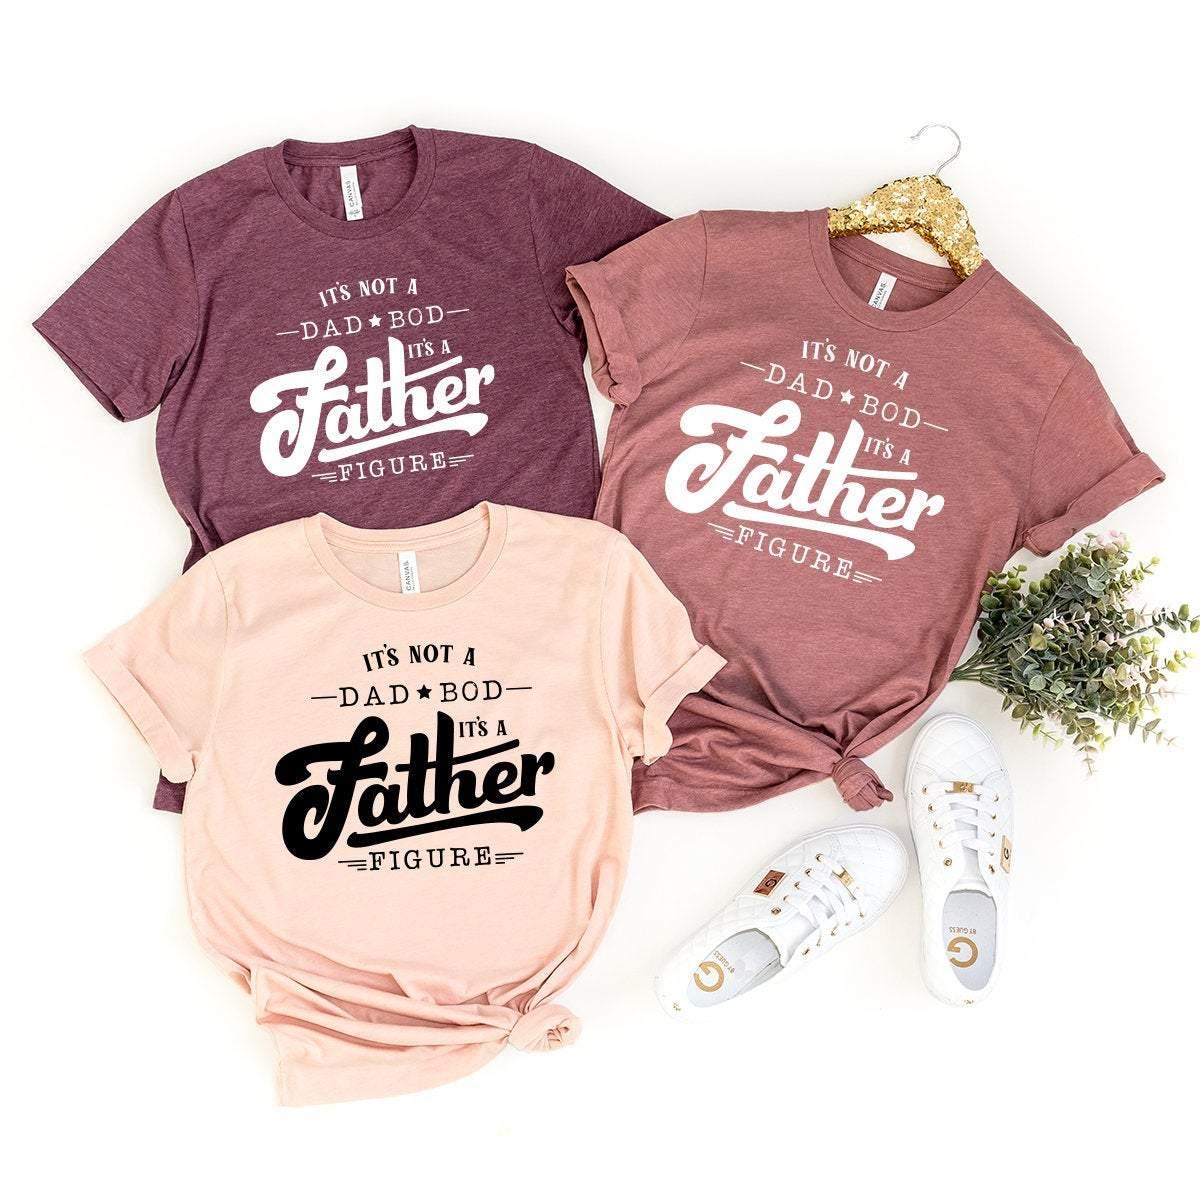 Funny Dad Tshirt, Dad Bod Shirt, Father Shirt Gift, It's Not A Dad Bod It's A Father Figure Shirt, Gift For Daddy, Best Dad Gifts - Fastdeliverytees.com